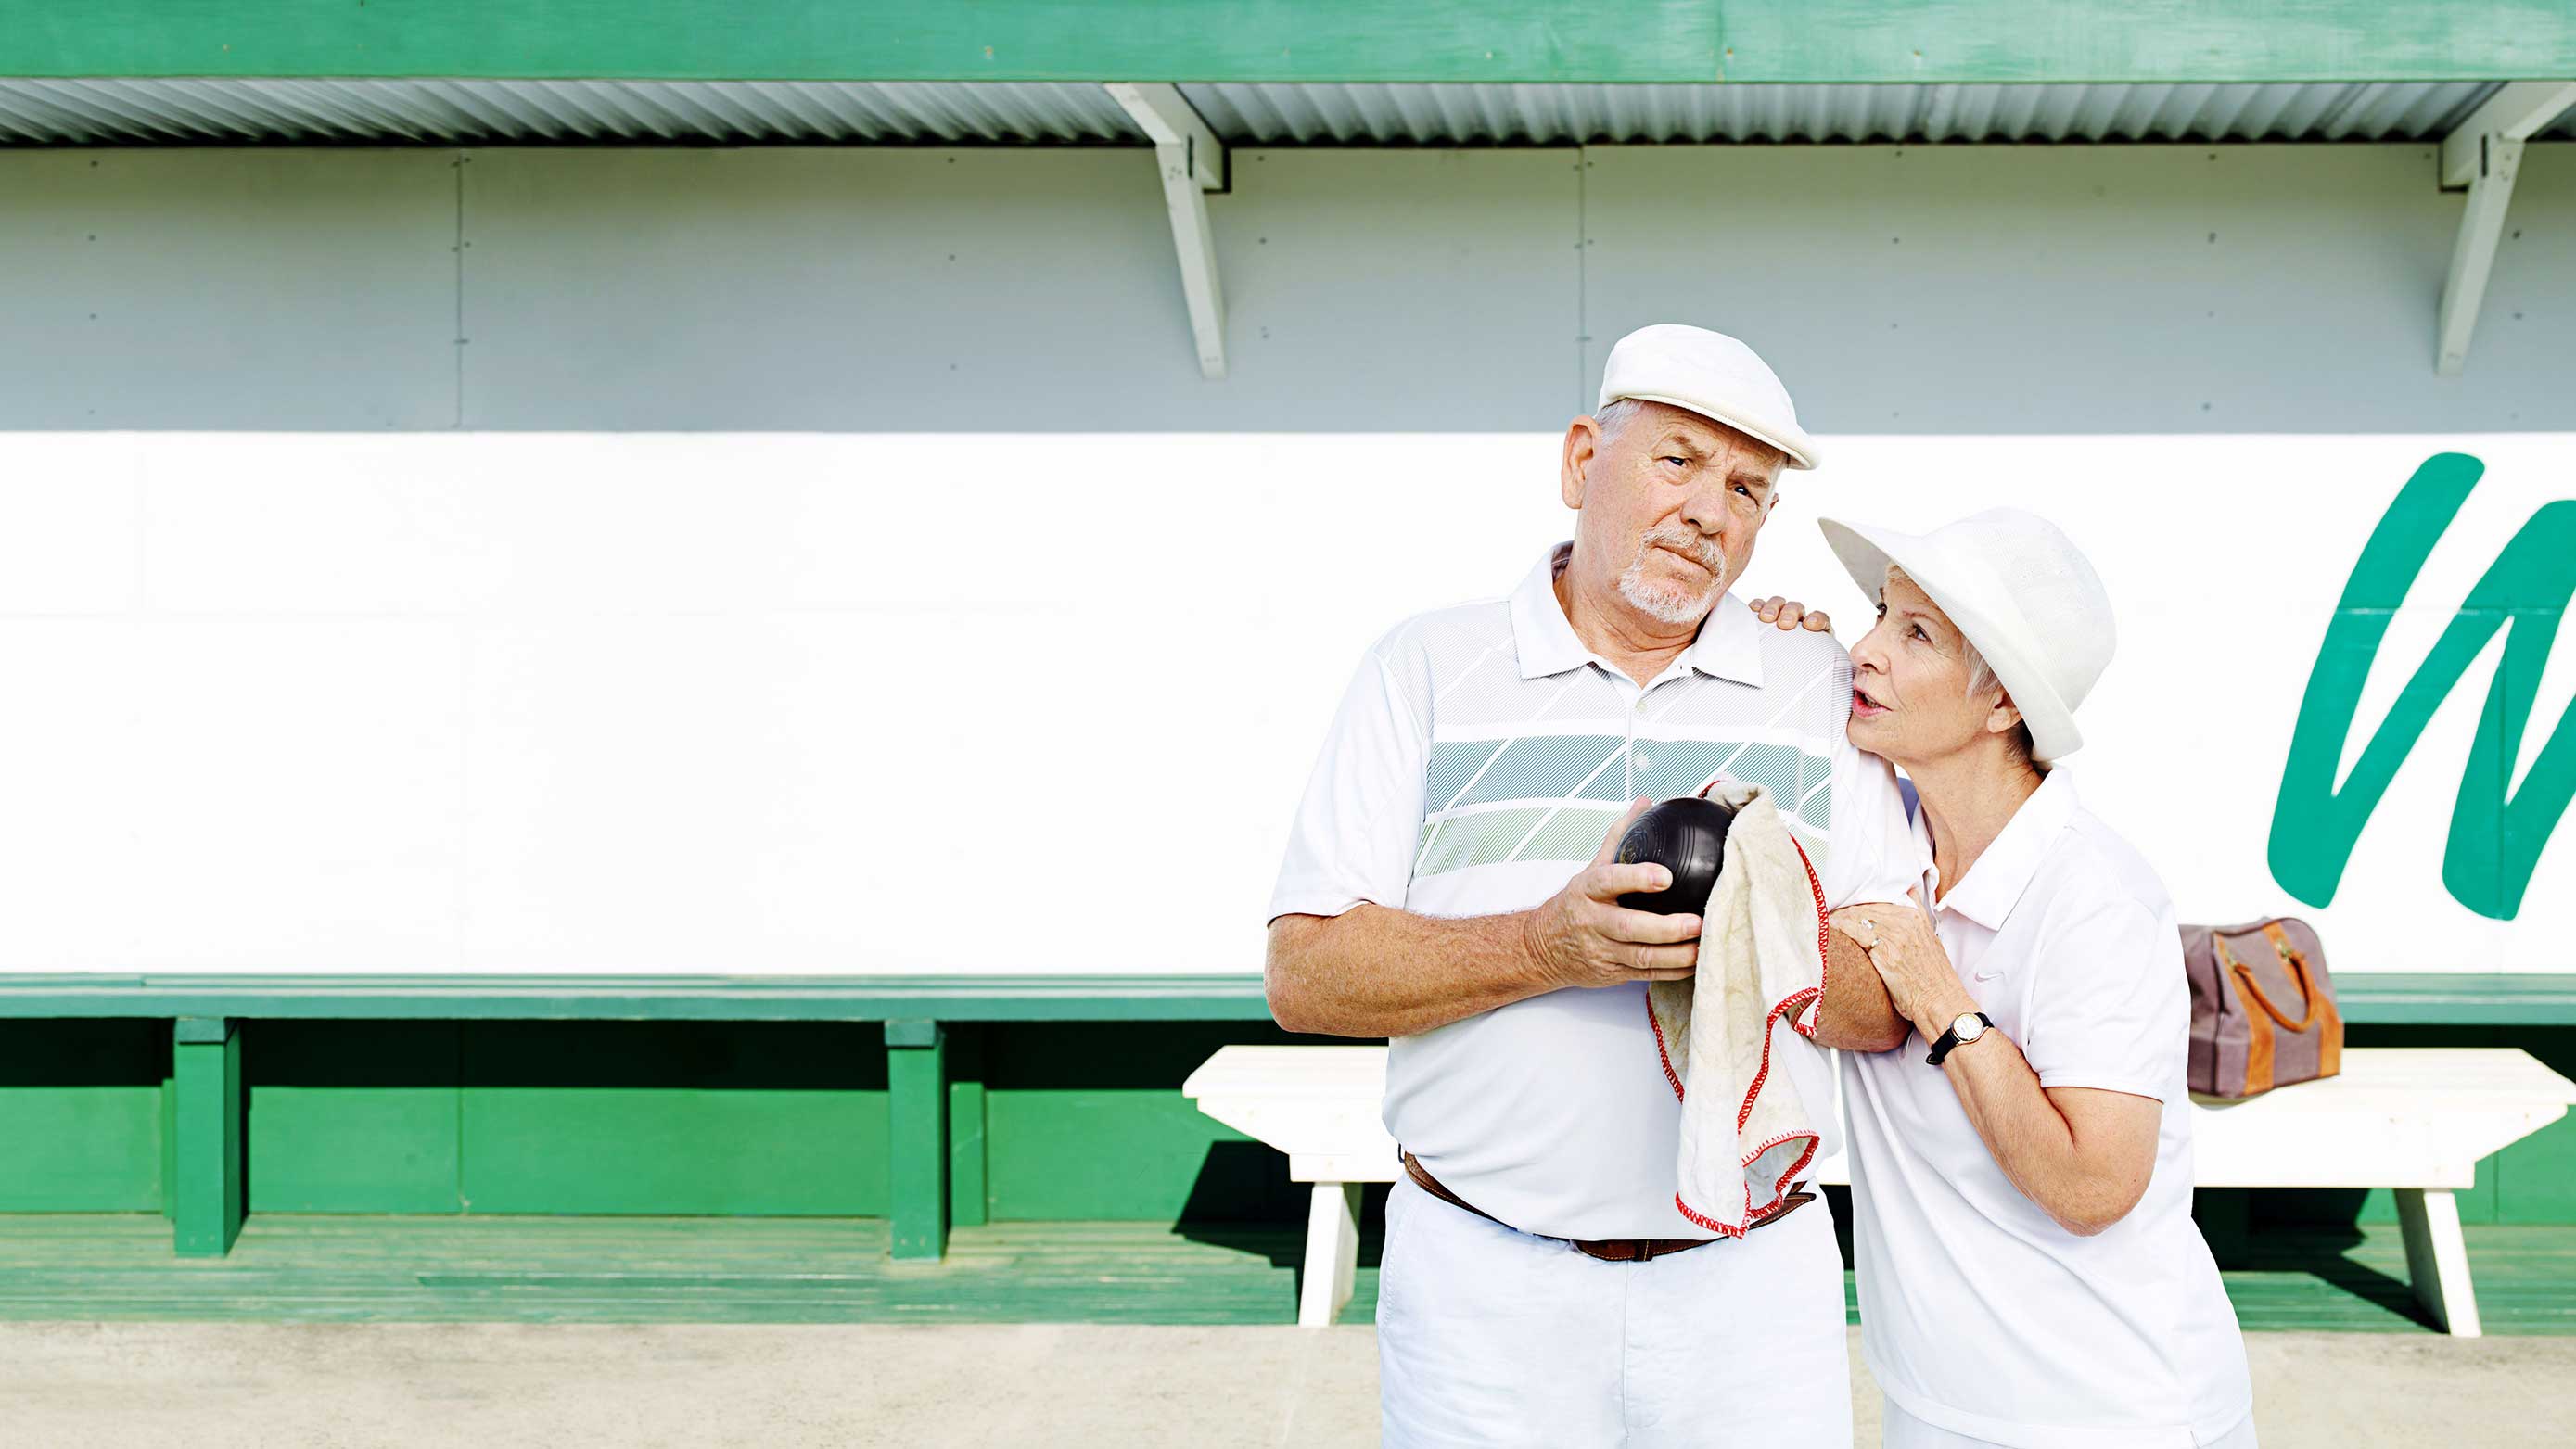 An older couple getting ready to play bowls